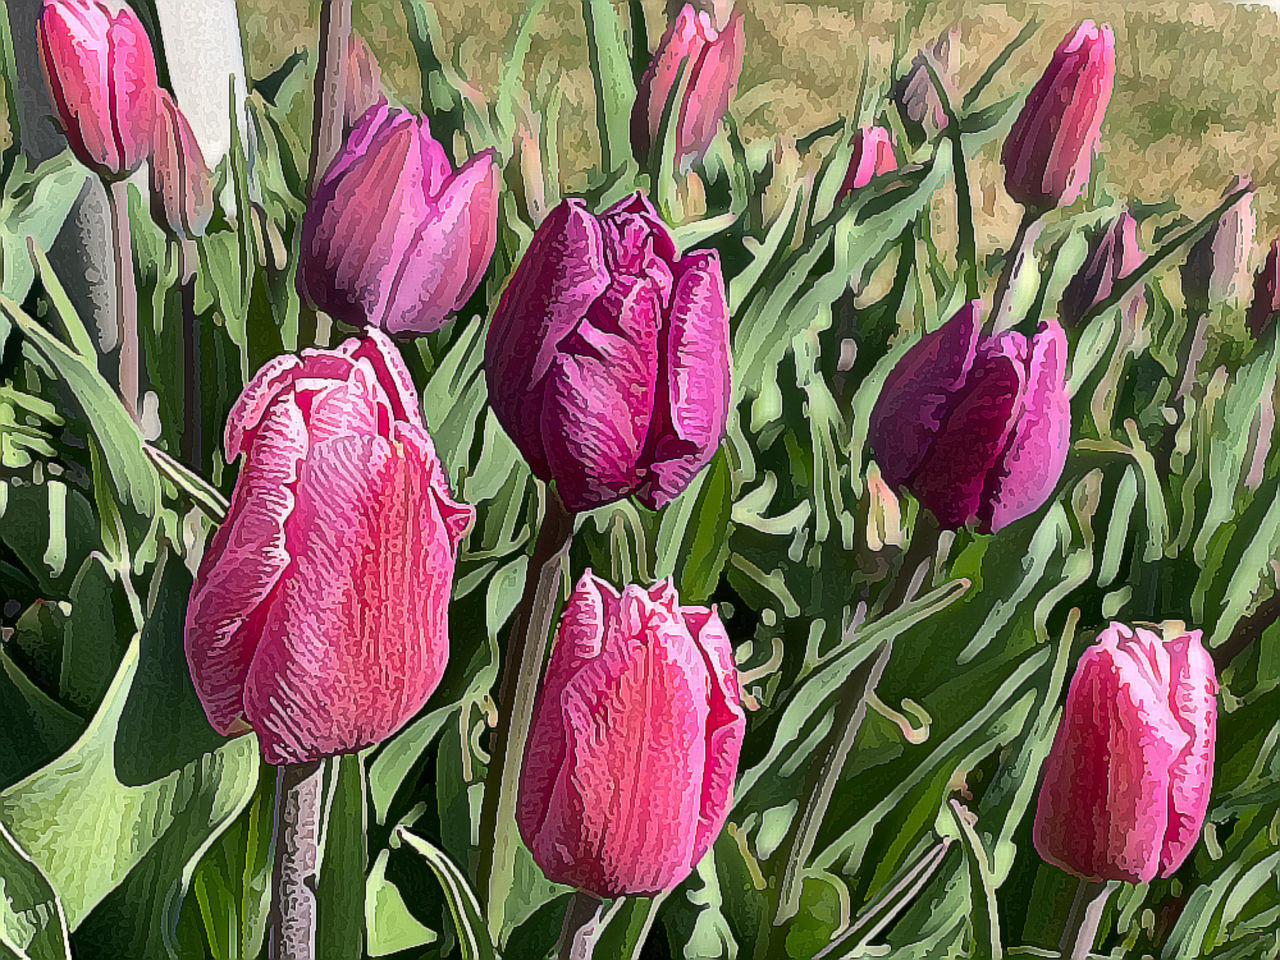 HIGH ANGLE VIEW OF PINK TULIPS ON PURPLE FLOWERING PLANTS